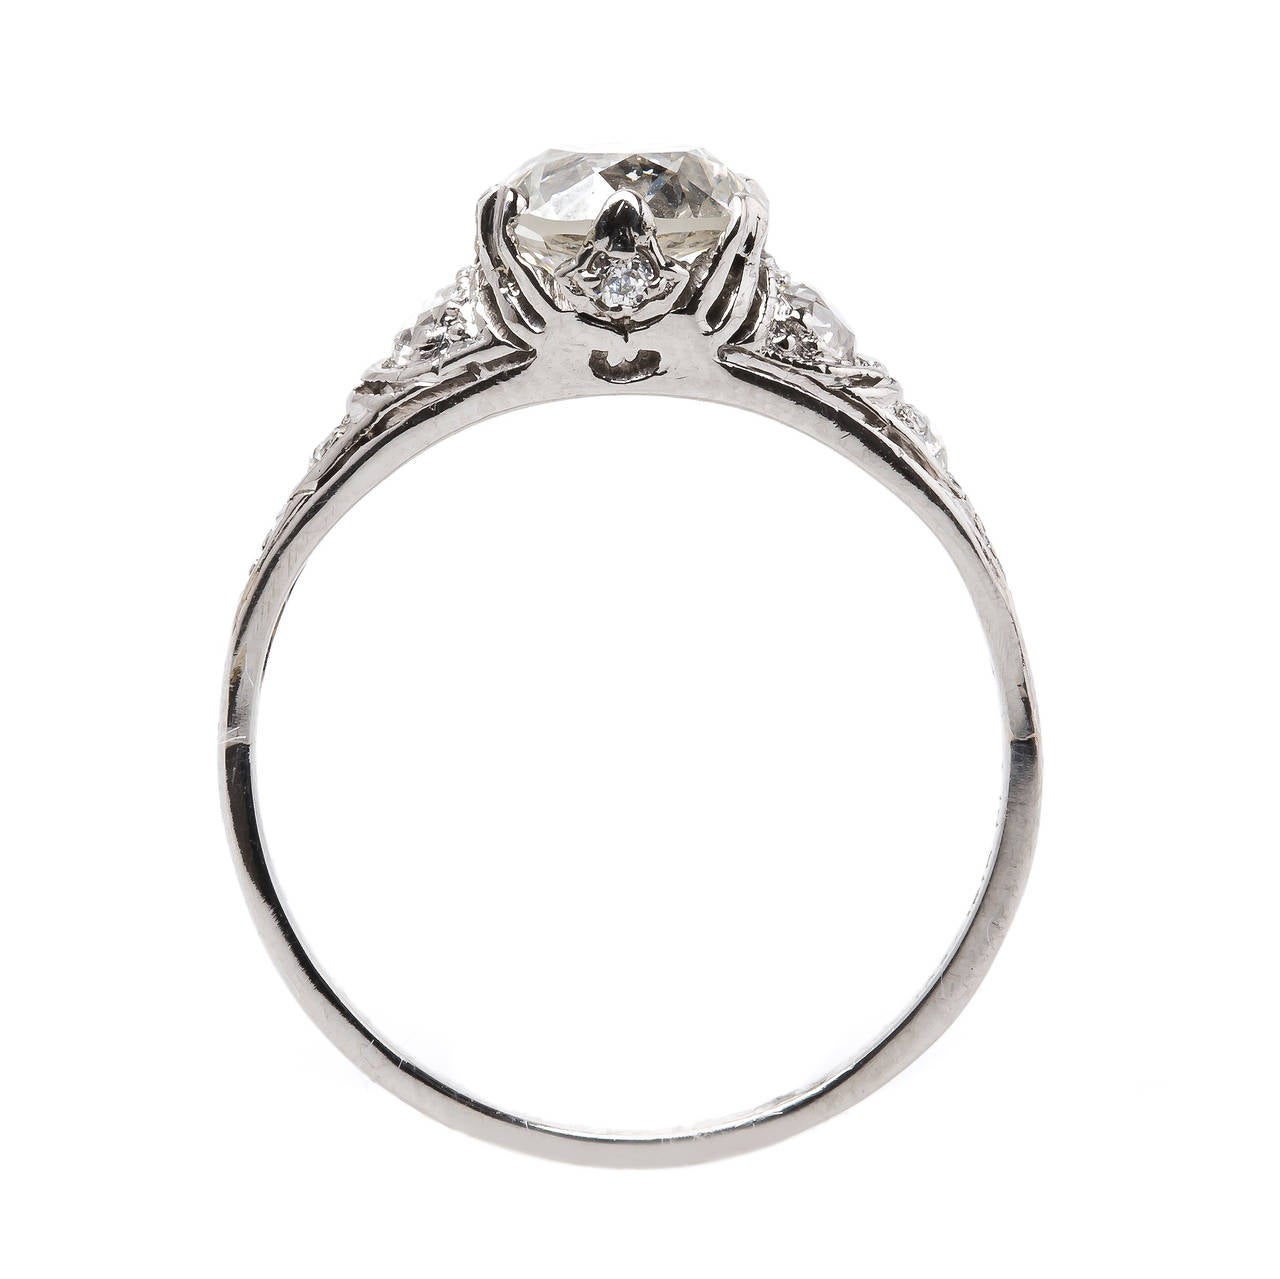 Lockhaven is a gorgeous Early Art Deco (circa 1915) platinum ring centering a six prong-set 1.42ct EGL certified Old European Cut diamond graded J color and VS1 clarity. Four Old European Cut diamonds line the shoulders of this lovely original ring